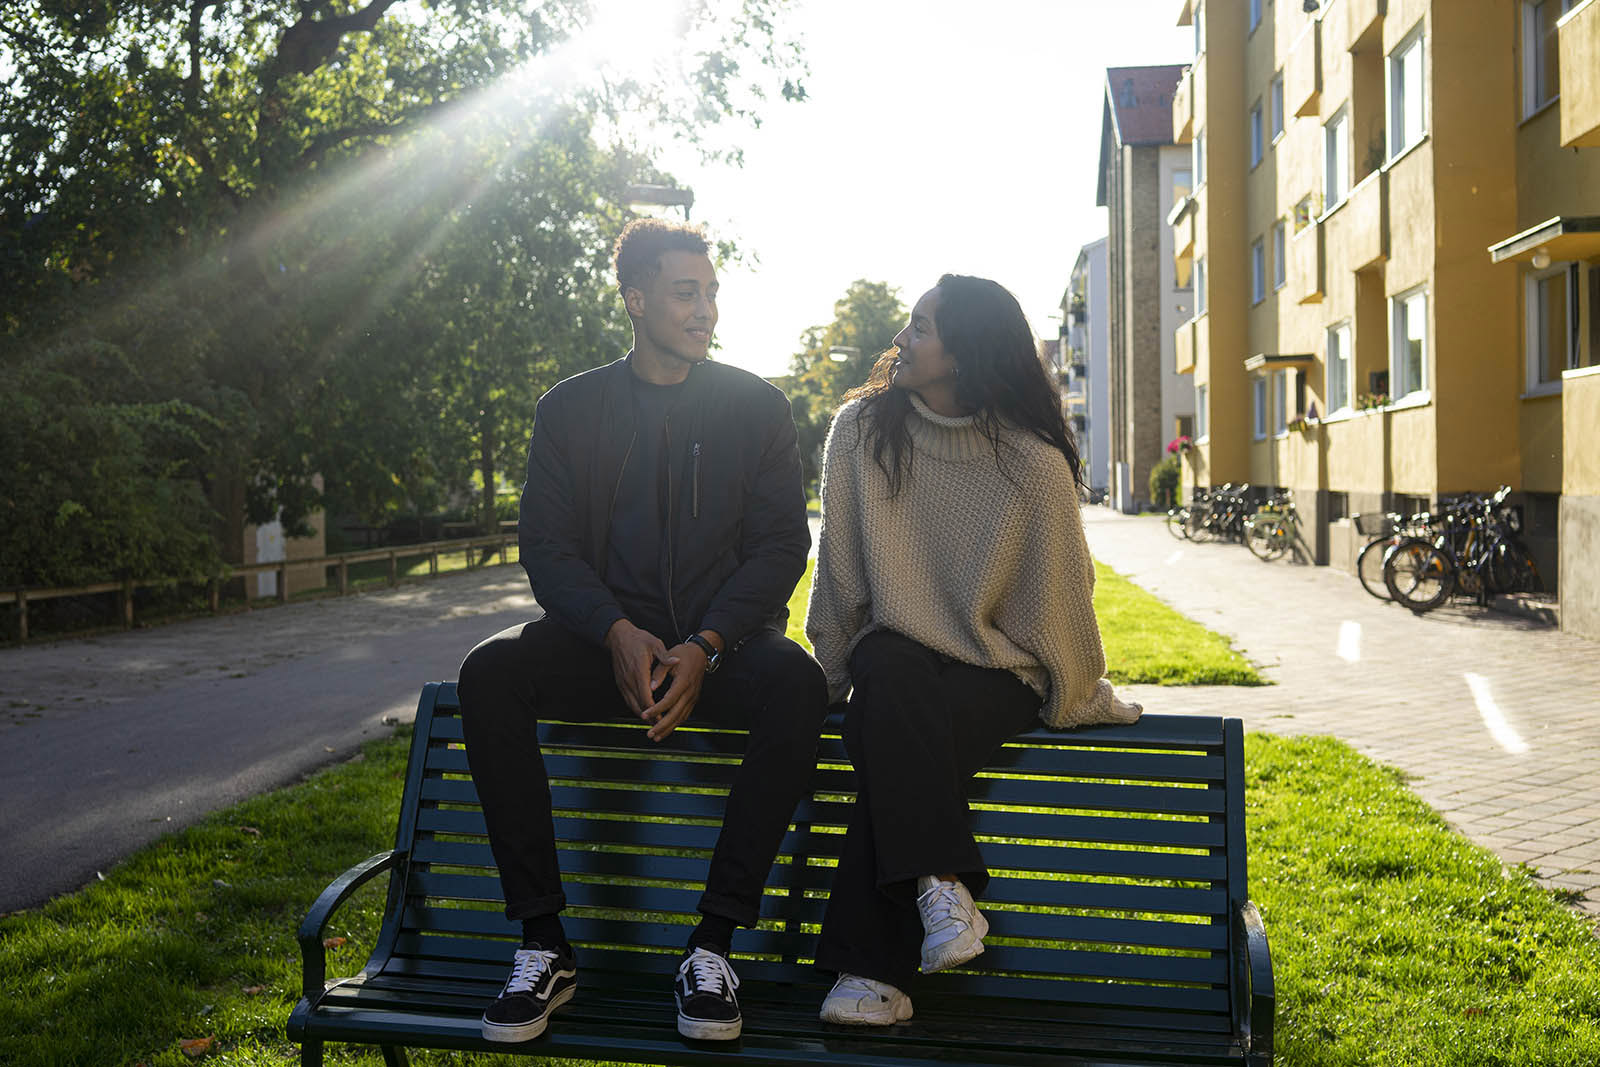 Two people are sitting on the backrest of a park bench in front of a block of flats.